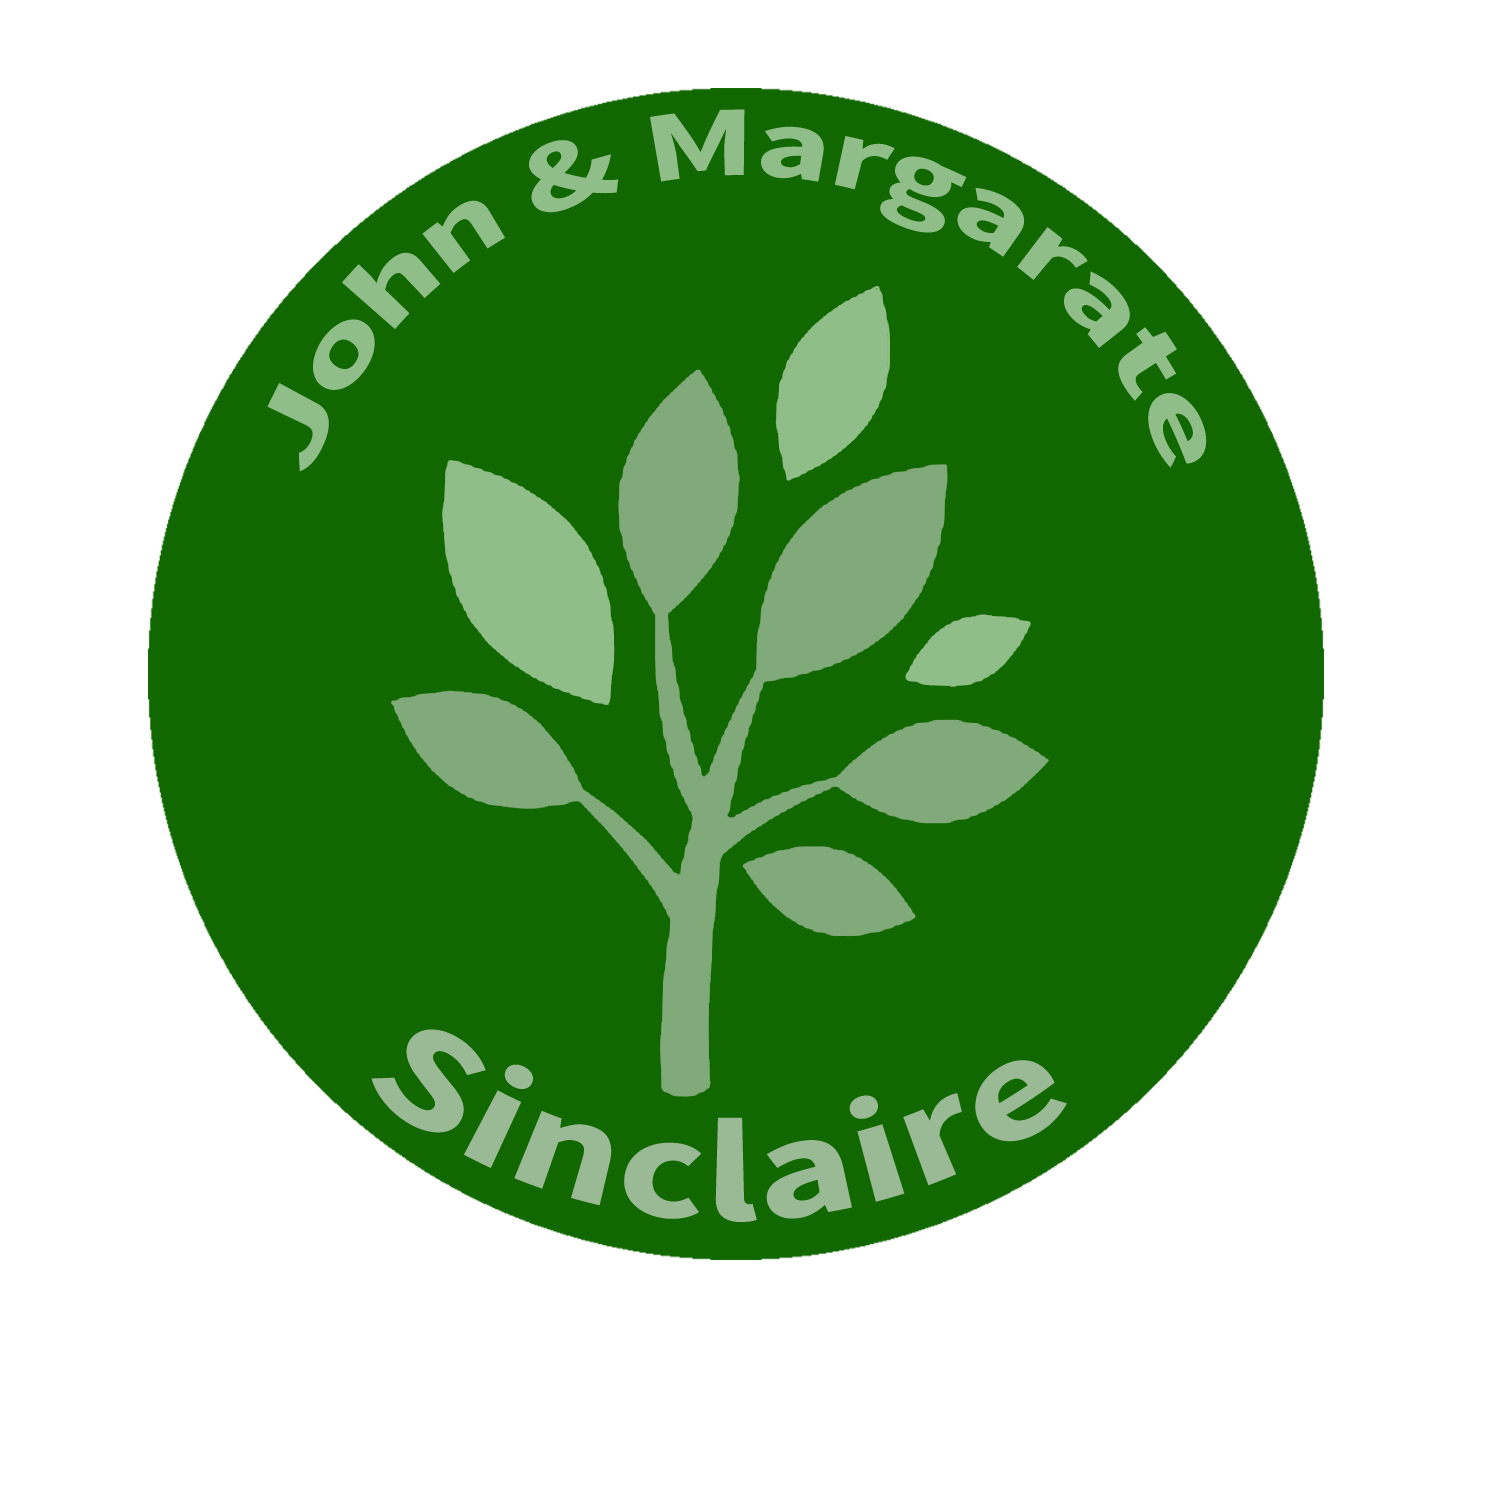 The Sinclaire Foundation